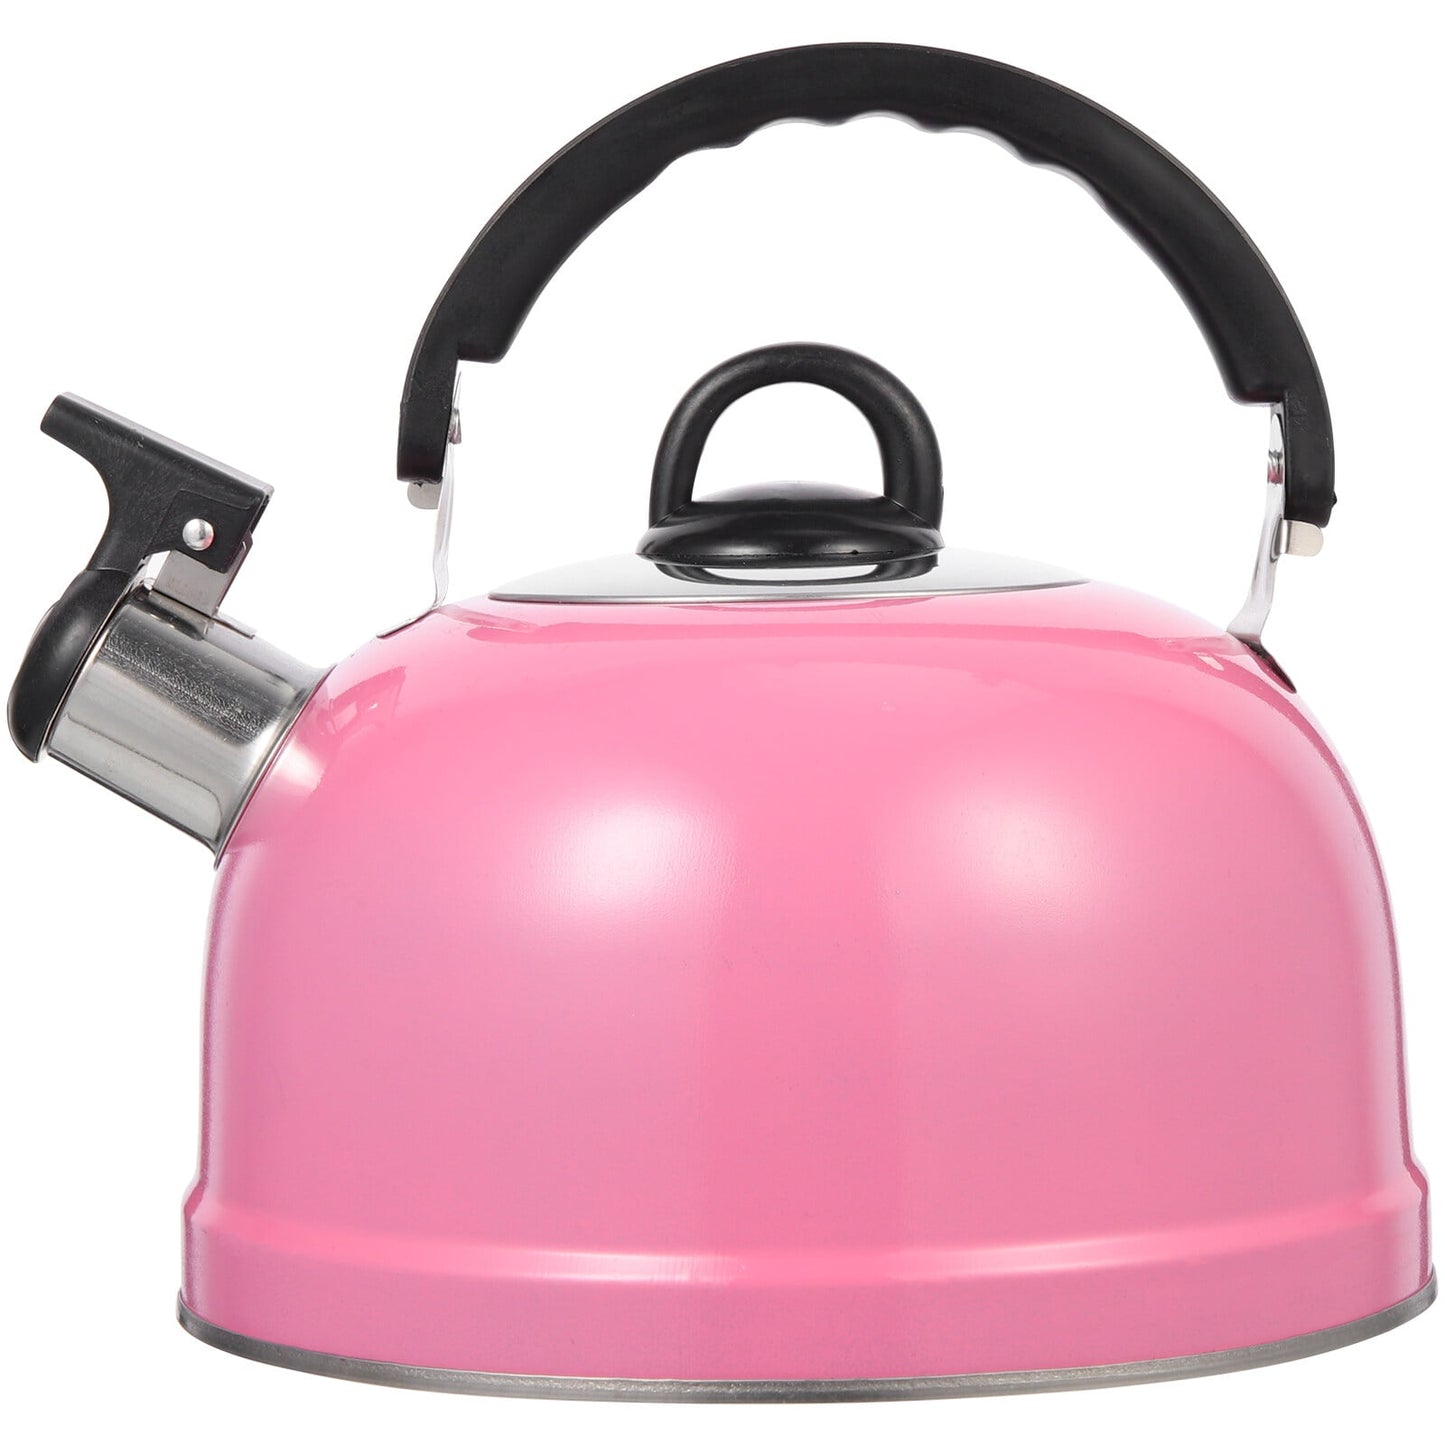 Hot Water Pot Practical Kettle Convenient Pot With Handle Kettle Pot for Boiling Water